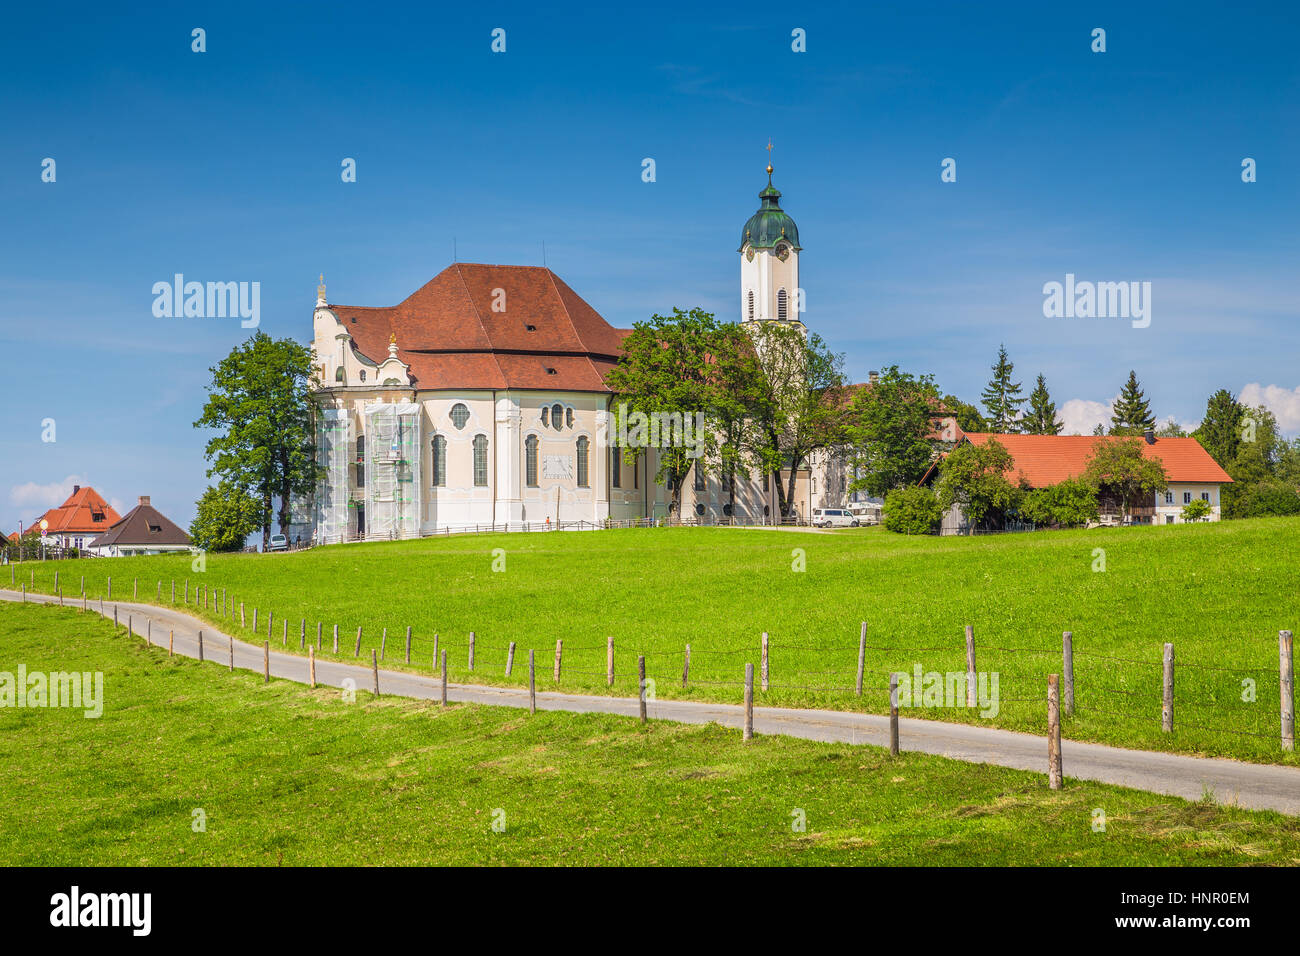 Beautiful view of famous oval rococo Pilgrimage Church of Wies (Wieskirche), a UNESCO World Heritage Site since 1983, in summer, Bavaria, Germany Stock Photo